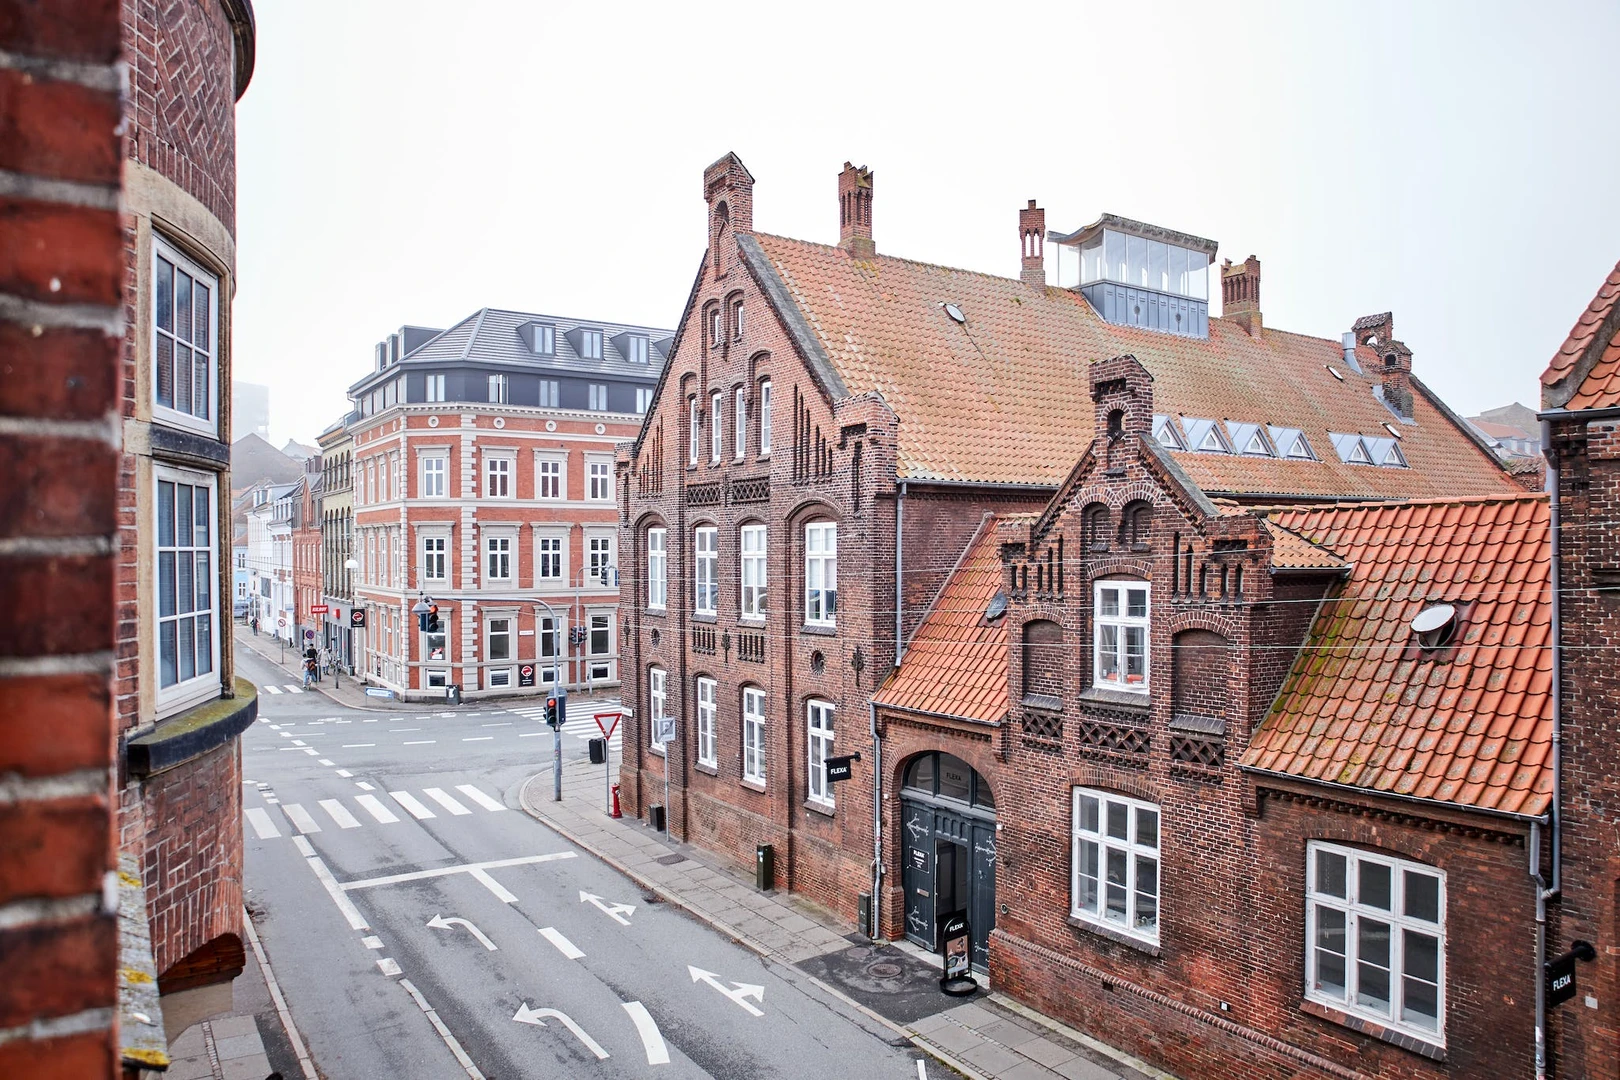 Renting rooms by the month in Aarhus